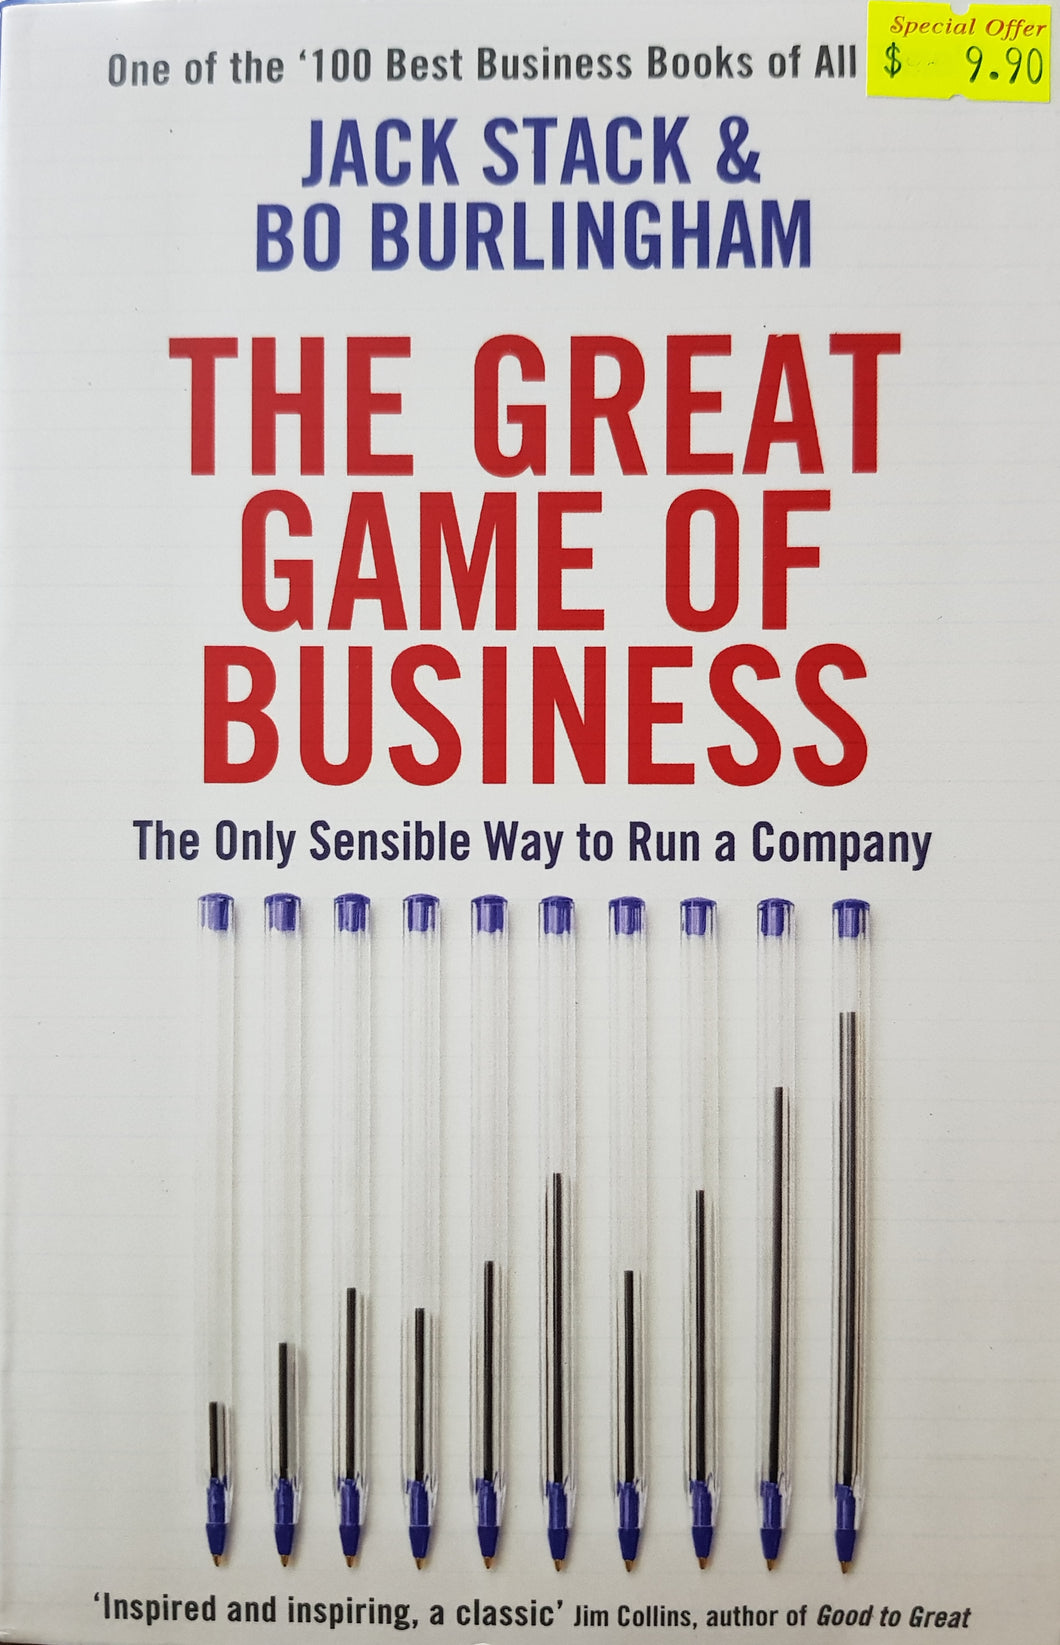 The Great Game of Business - Jack Stack & Bo Burlingham